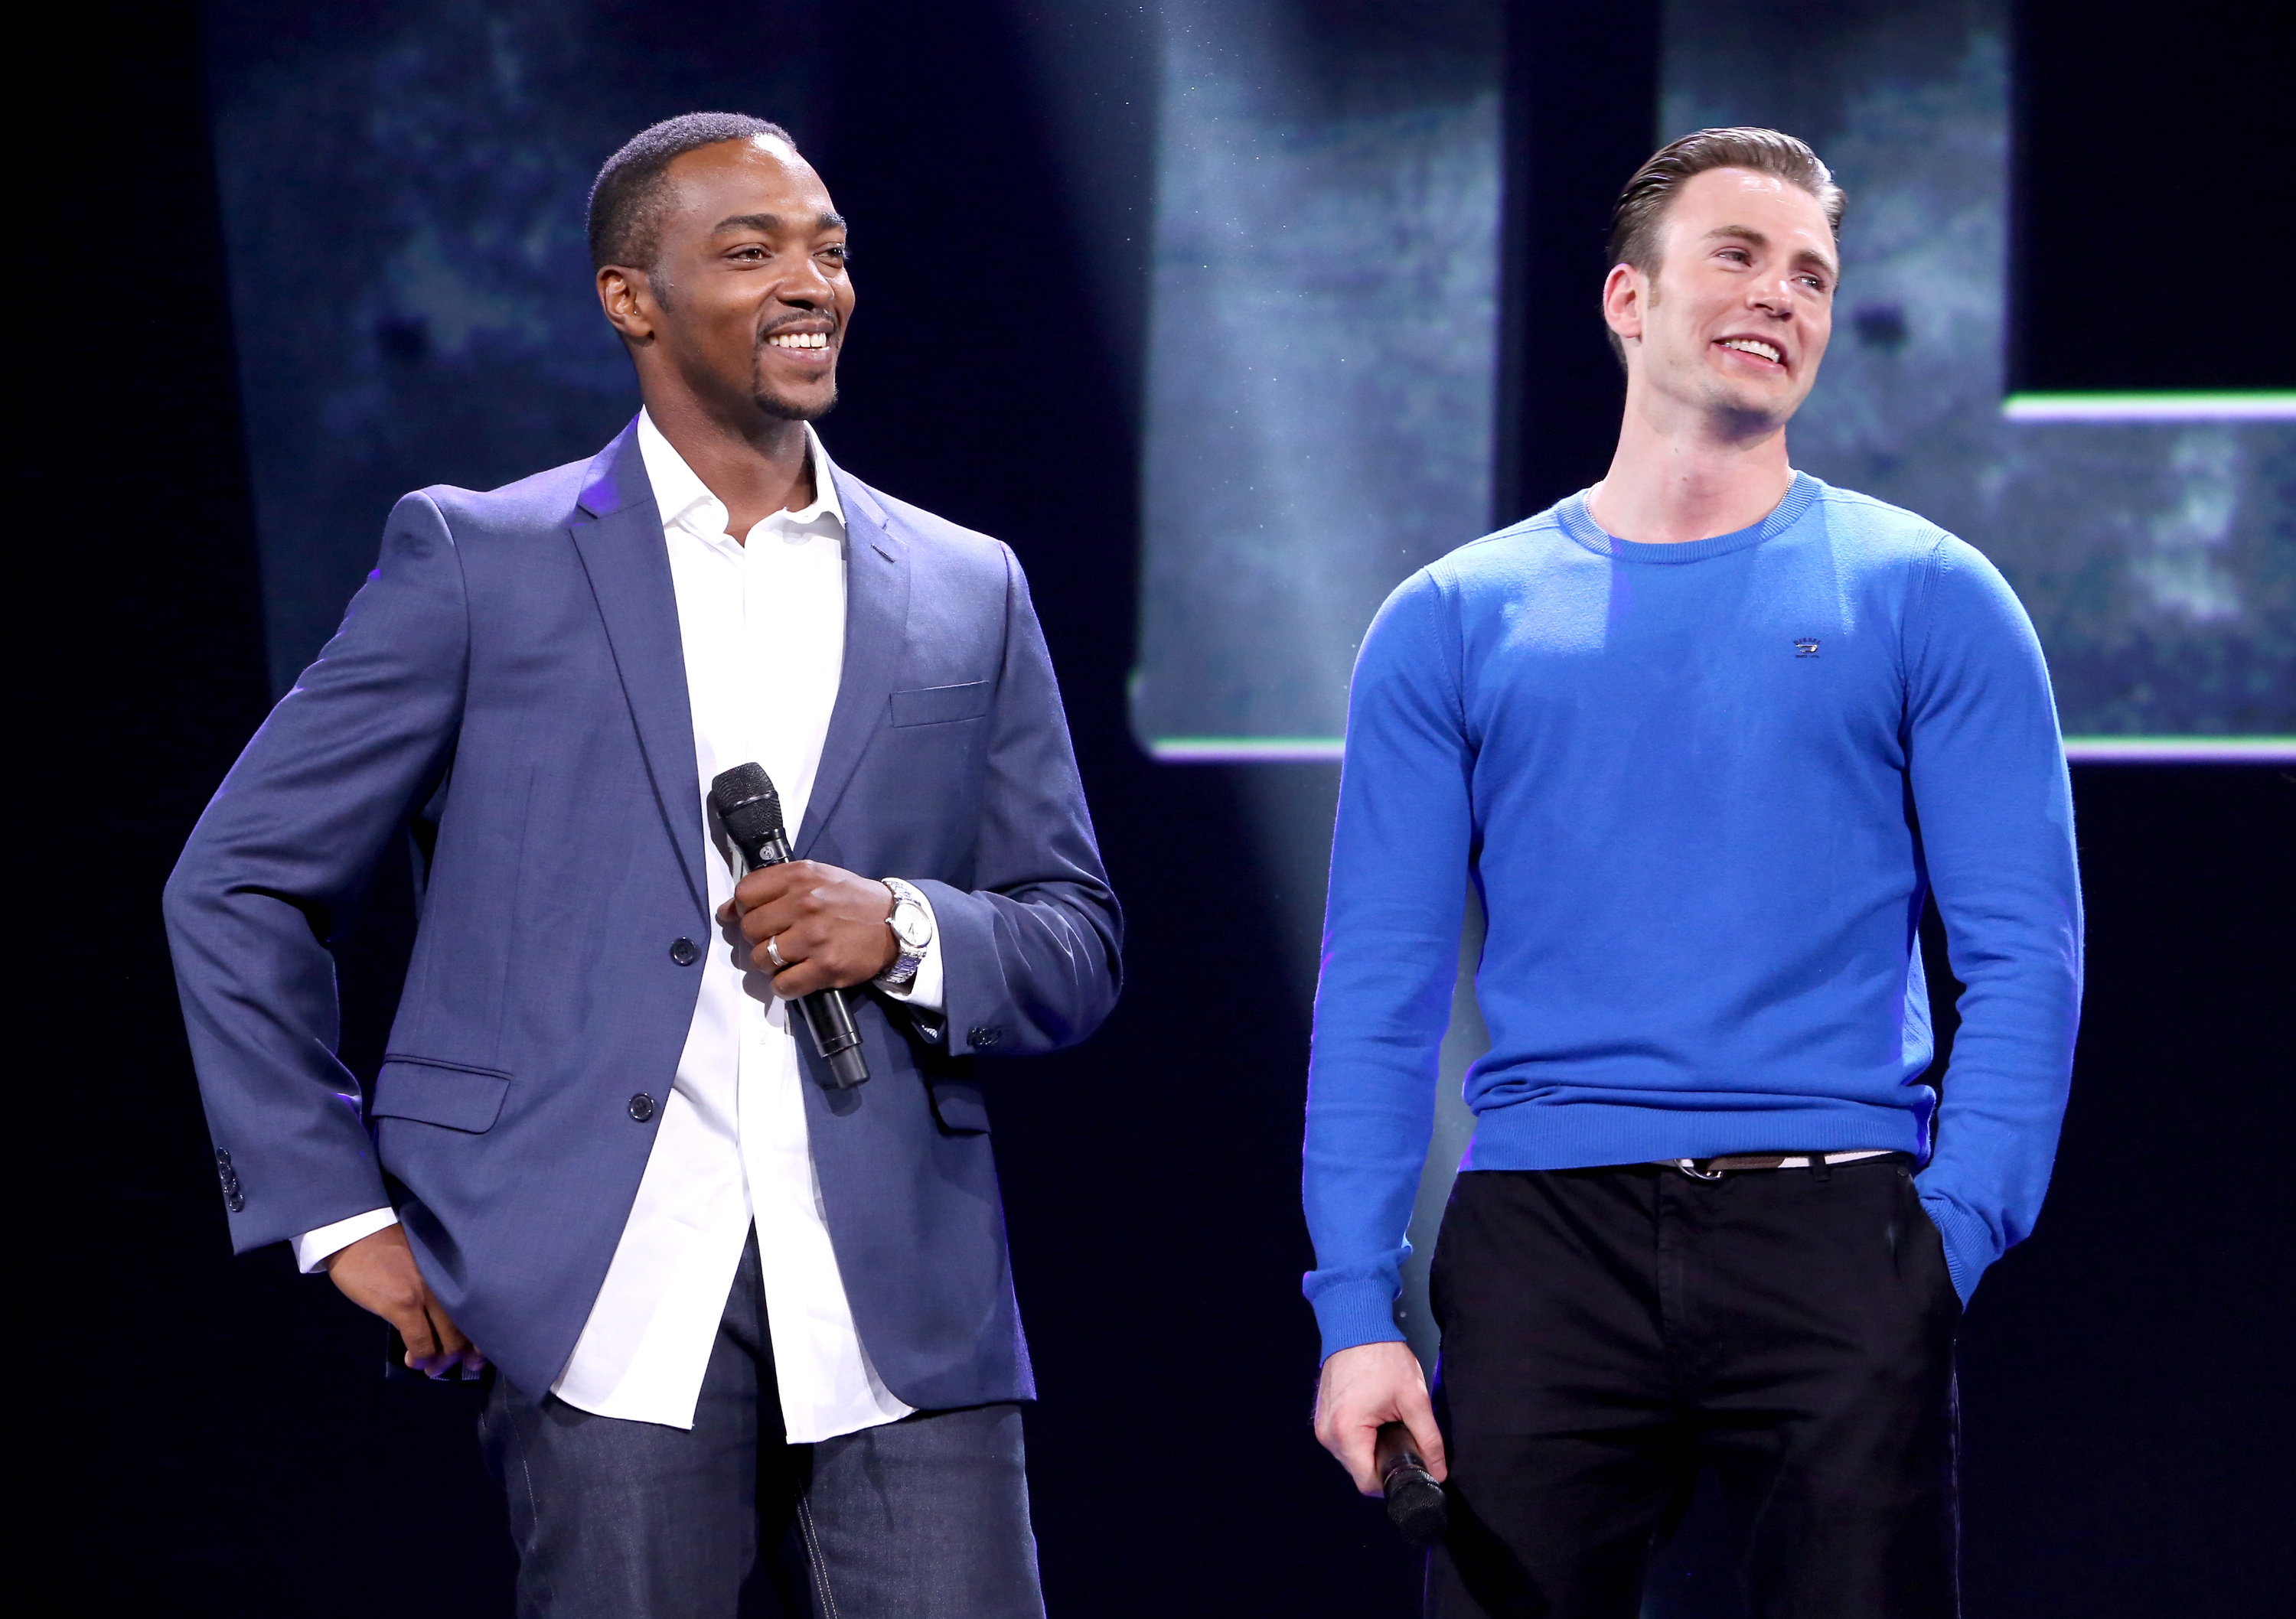 Anthony Mackie Signs On For Disney, Marvel’s “Captain America 4”: Report